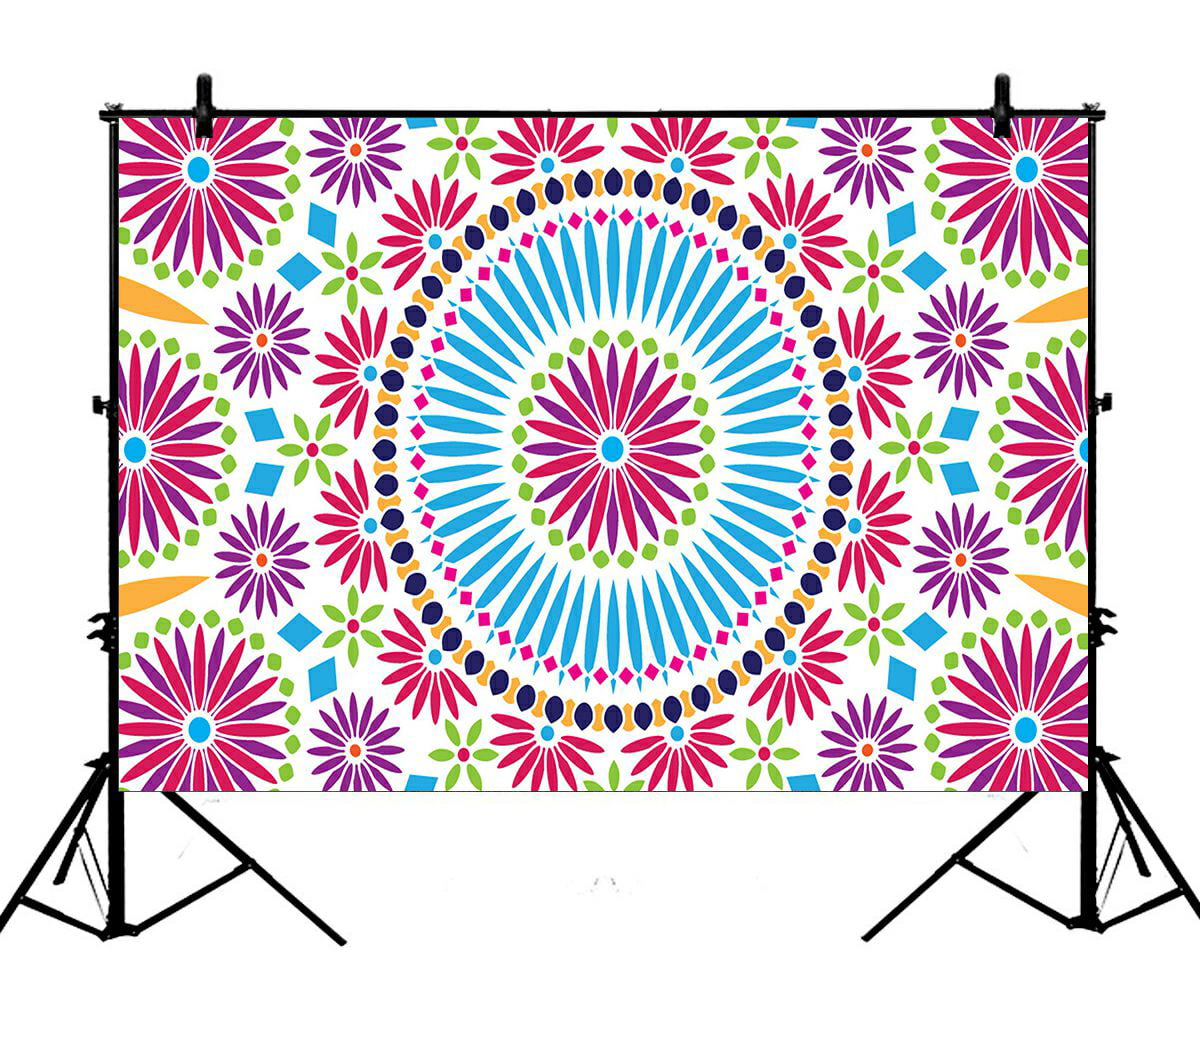 Moroccan 7x5 FT Vinyl Photo Backdrops,Collection of Ceramic Mosaic Tiles and Figures with Mathematical Geometric Artful Background for Child Baby Shower Photo Studio Prop Photobooth Photoshoot